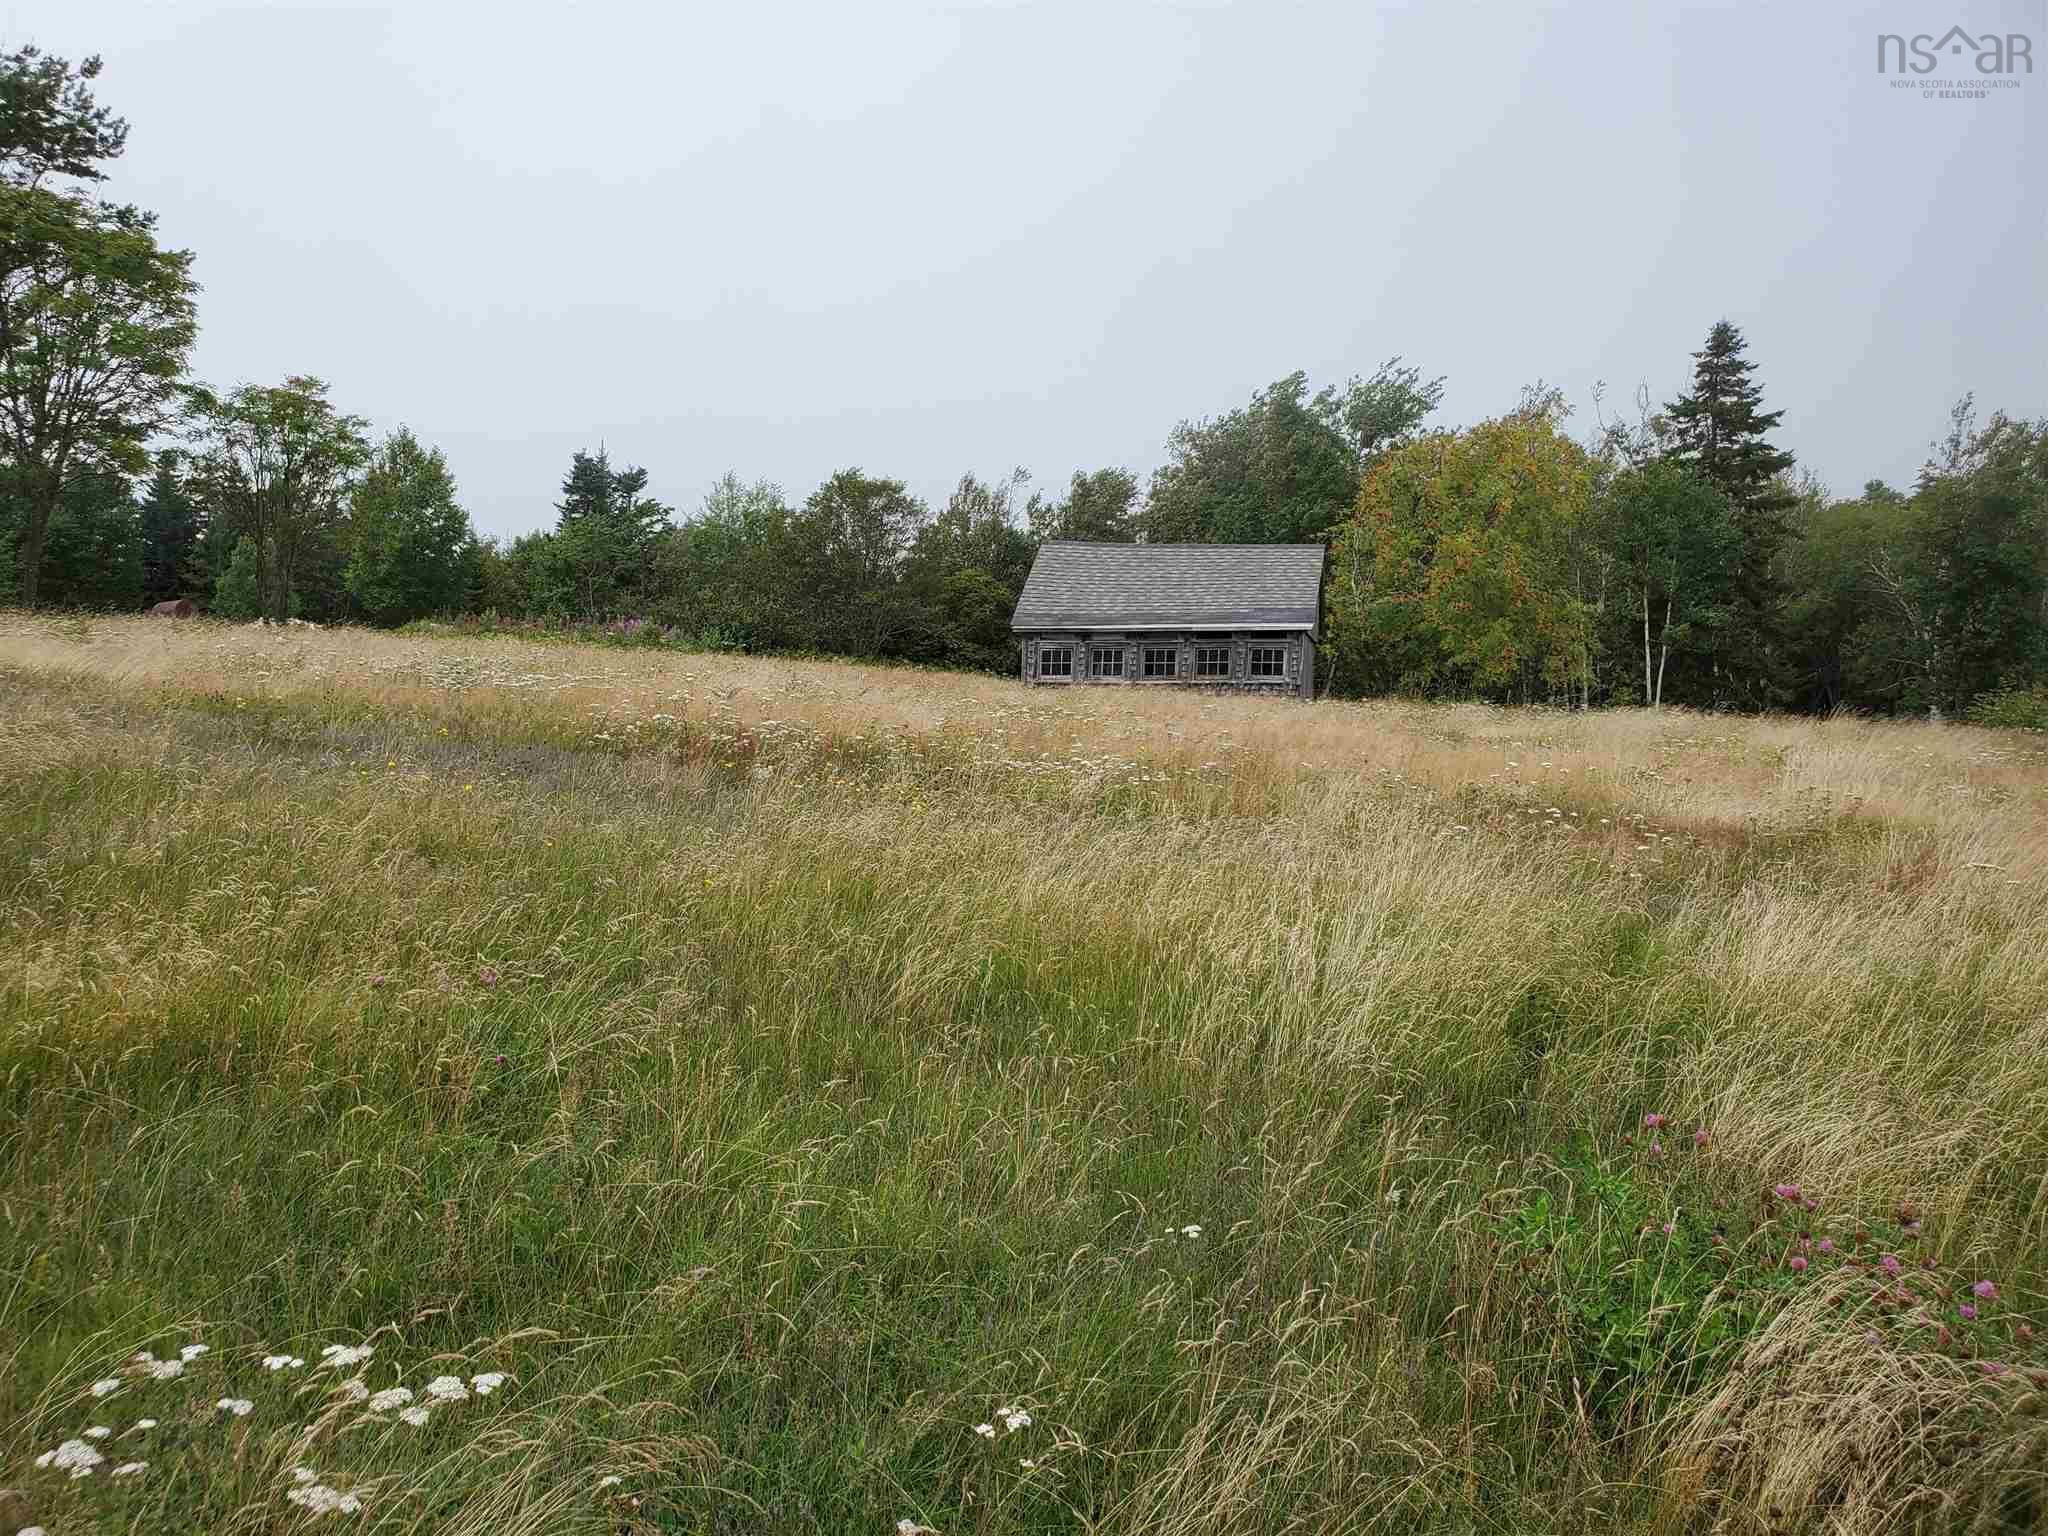 Main Photo: Lot 21-1 209 Highway in Spencers Island: 102S-South Of Hwy 104, Parrsboro and area Vacant Land for sale (Northern Region)  : MLS®# 202121606